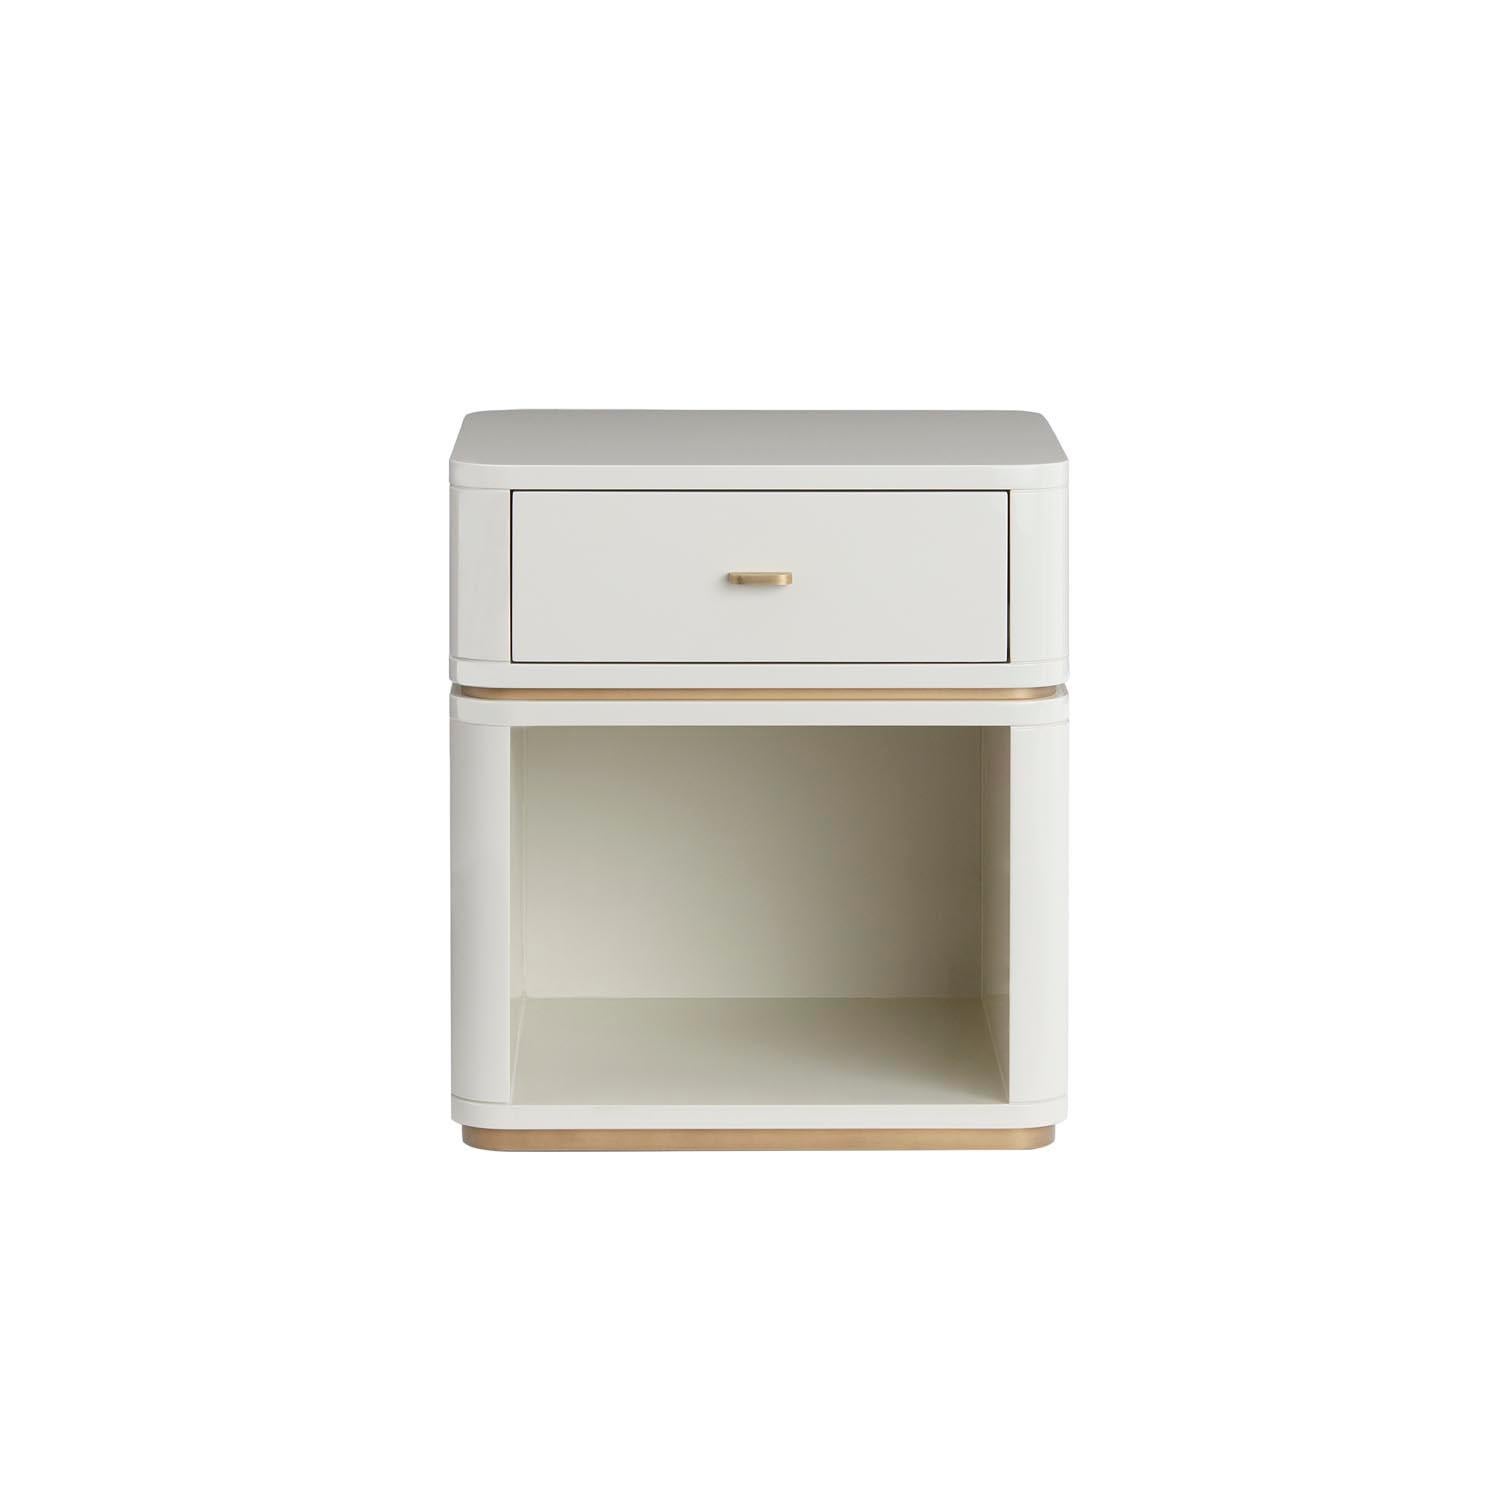 Robust and at the same time very elegant, the Cris bedside table is suitable for bedrooms with classic or contemporary style.‎ Cris, equipped with drawer and open unit, is made of lacquered wood, with details in metal, brass or stainless